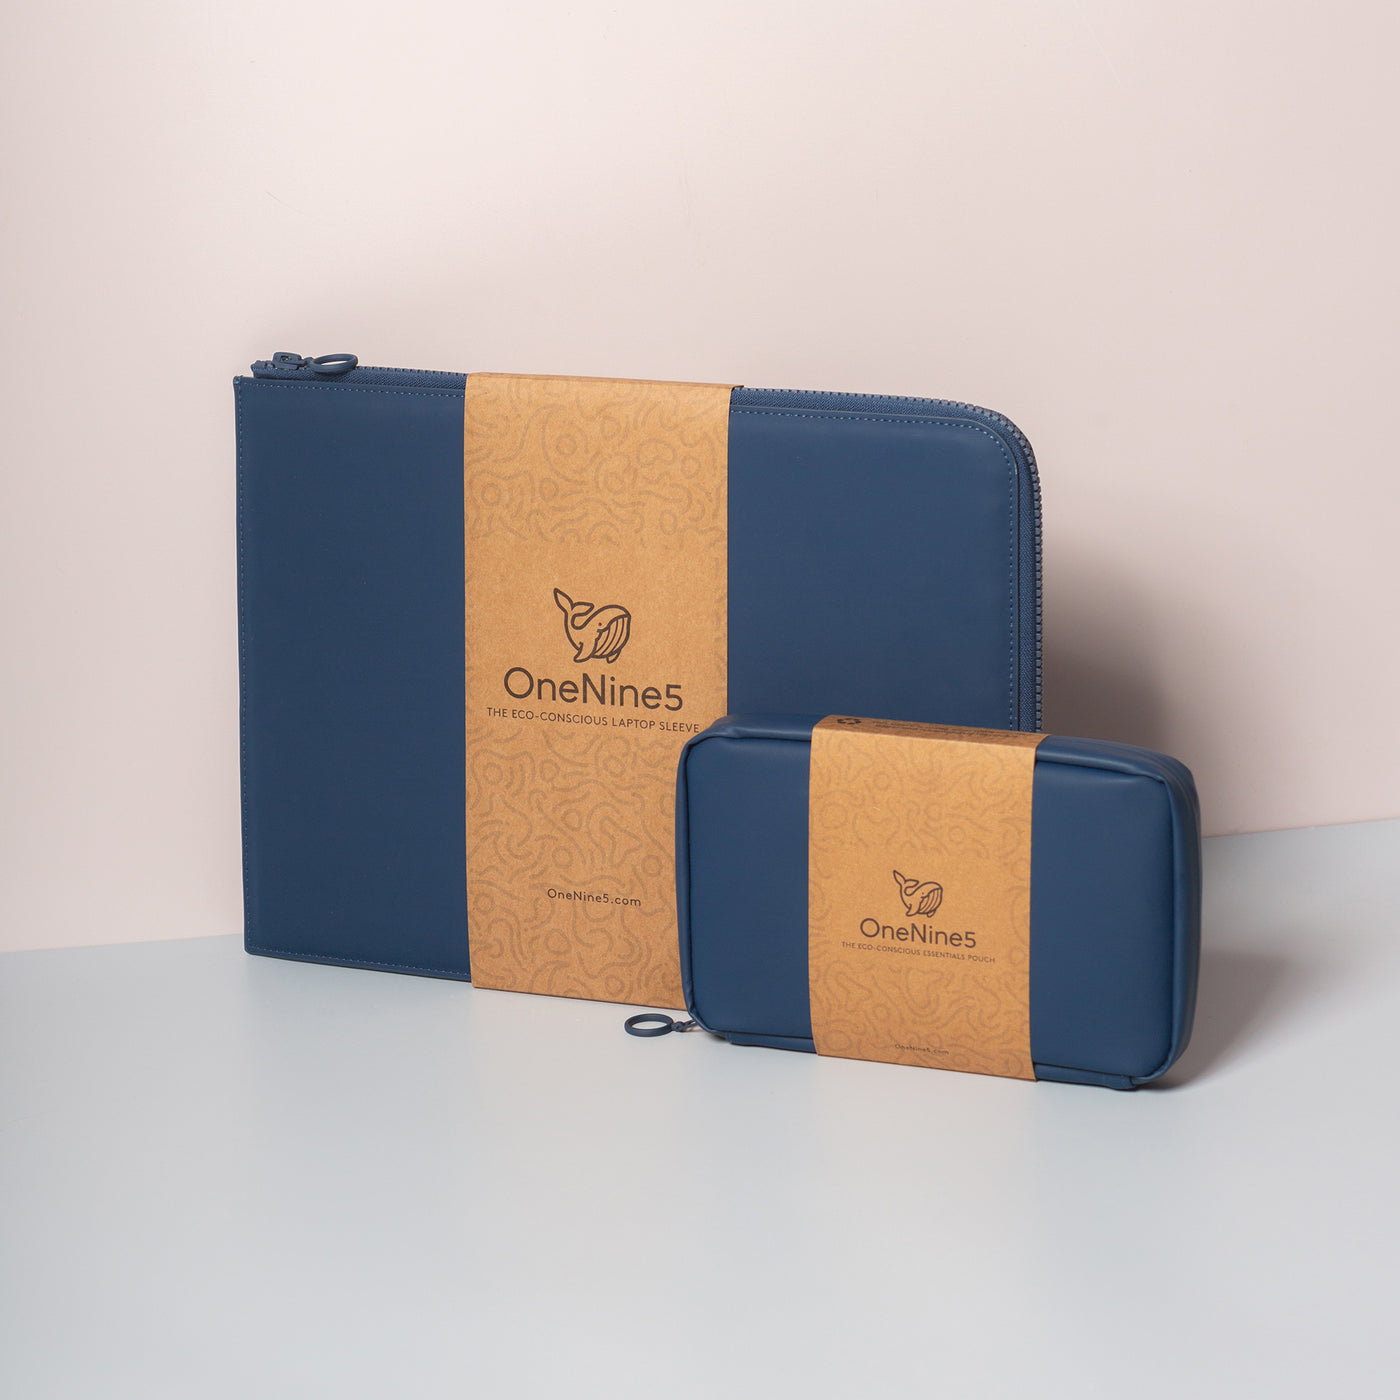 OneNine5 blue coconut padded 13" Eco-Conscious Laptop Sleeve and vegan leather Eco Essentials Pouch. Packaged in a brown and recyclable kraft paper sleeve